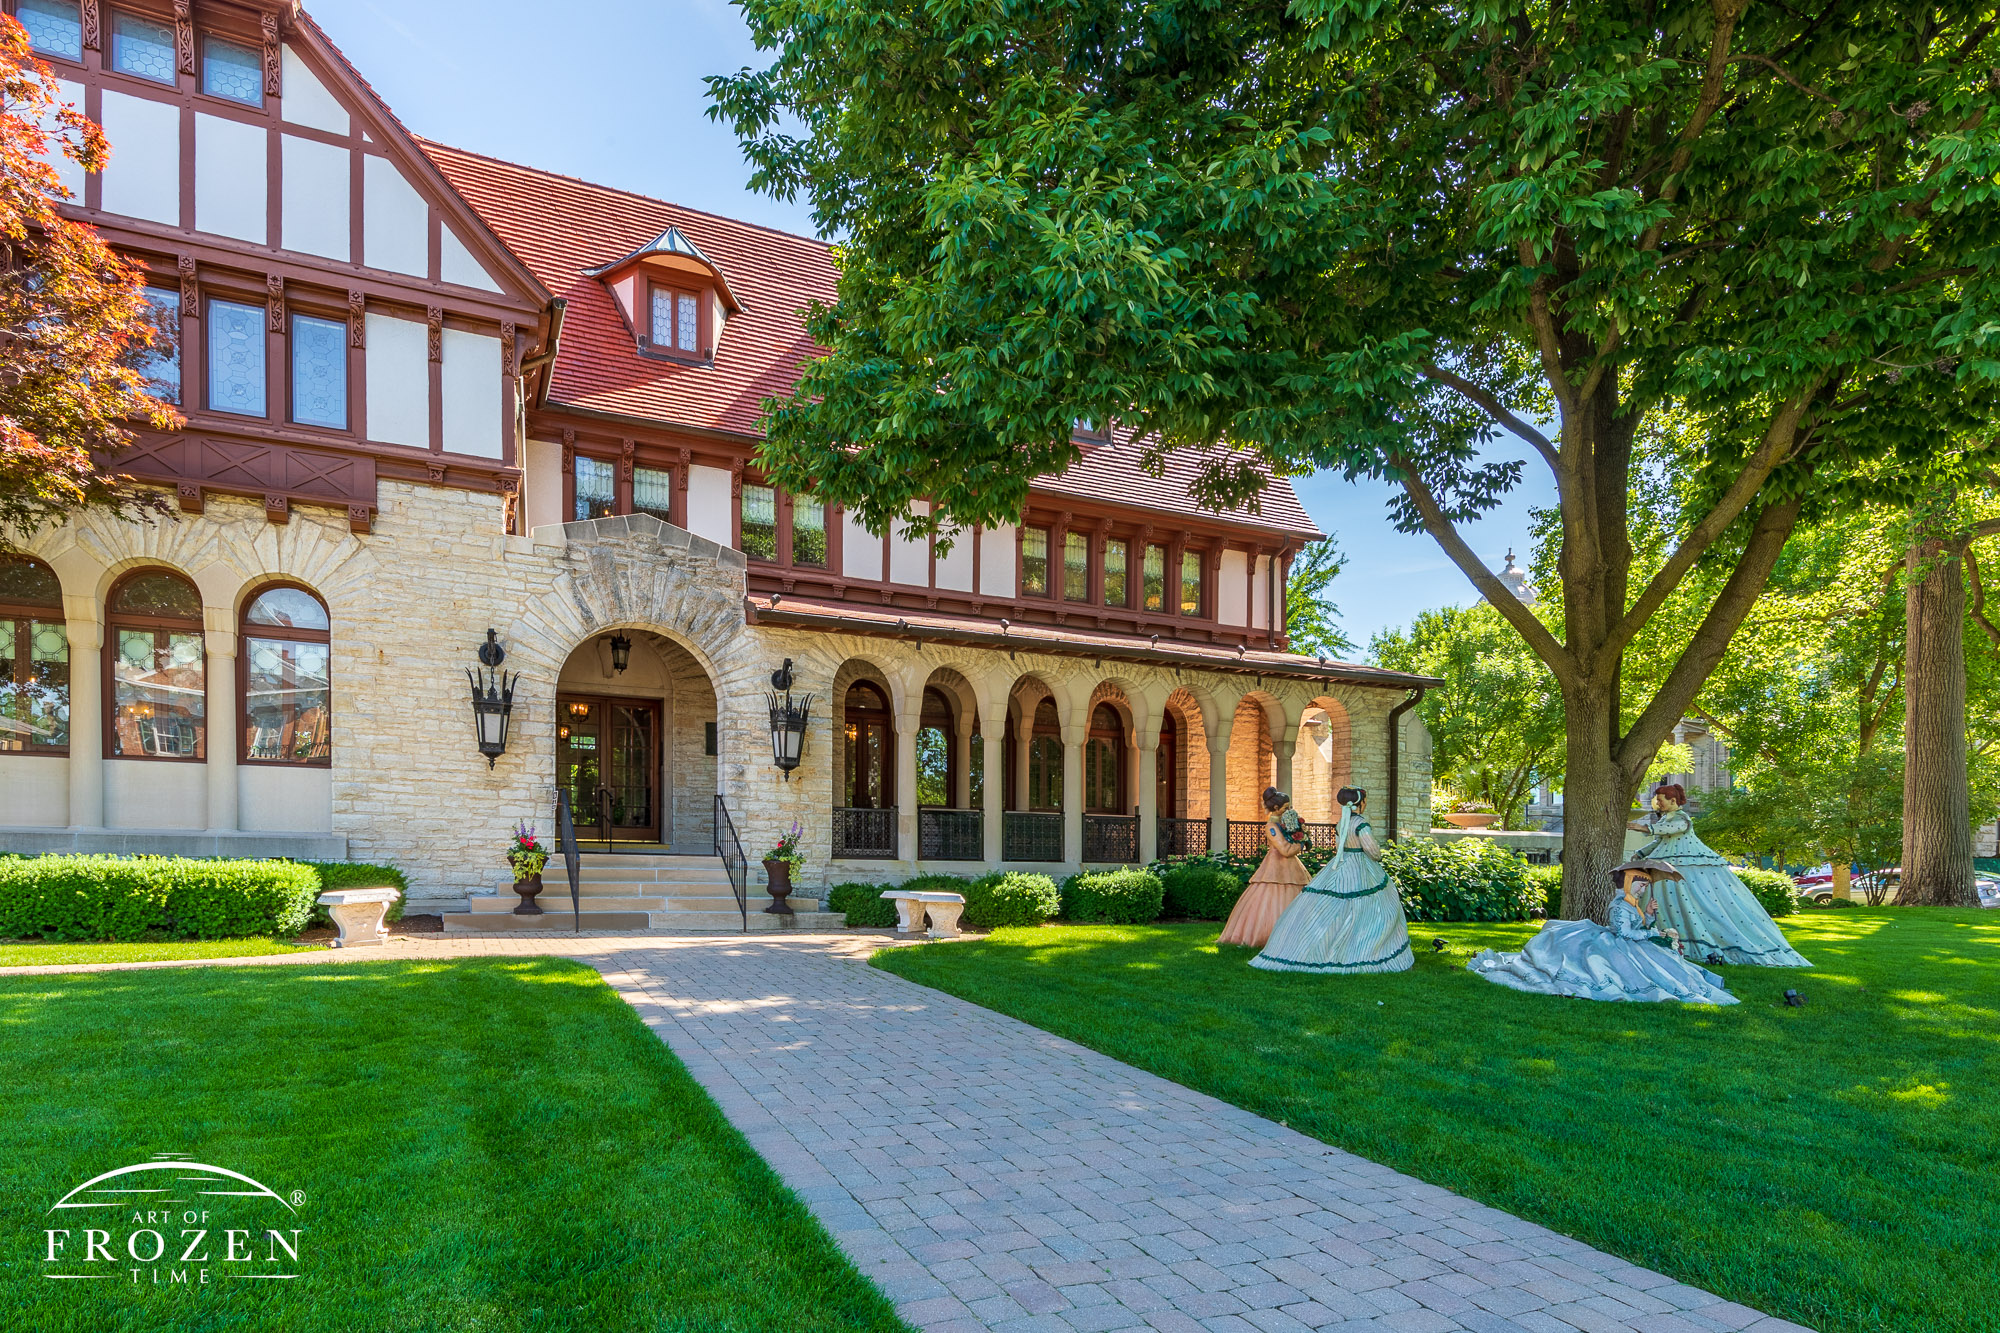 The Troy-Hayner Cultural Center resides in a home featuring Romanesque architecture such as this exterior view where sunlight washes over the stone facade and tile work and surrounding trees provide cool shade